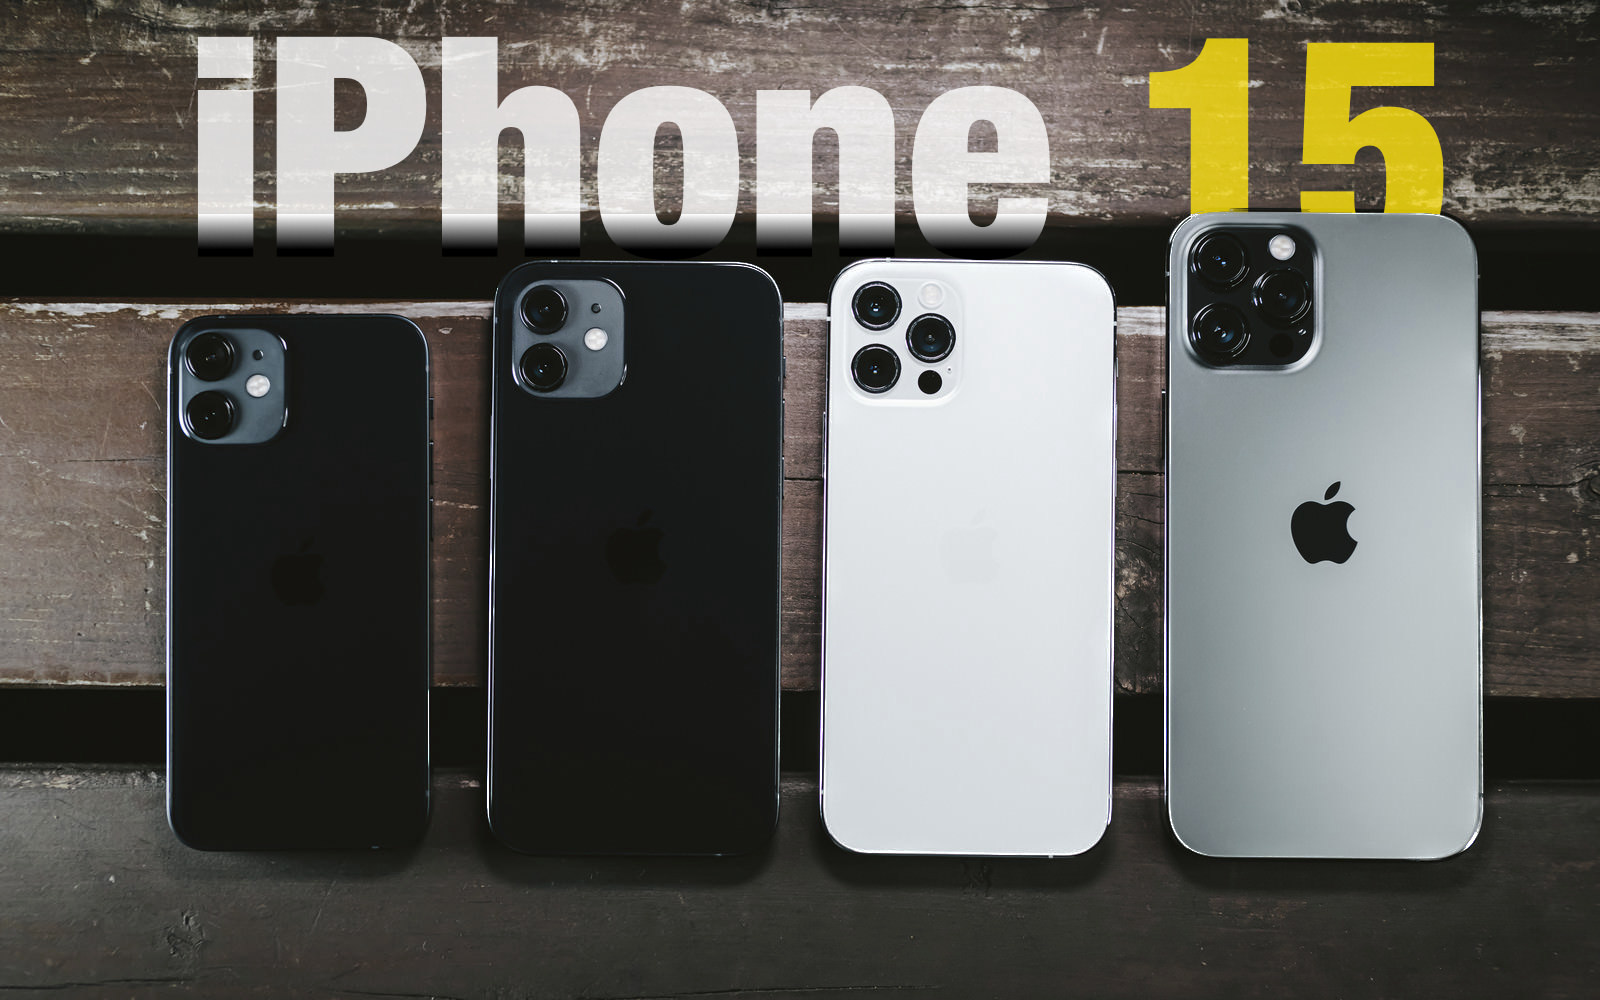 Iphone 15 all devices